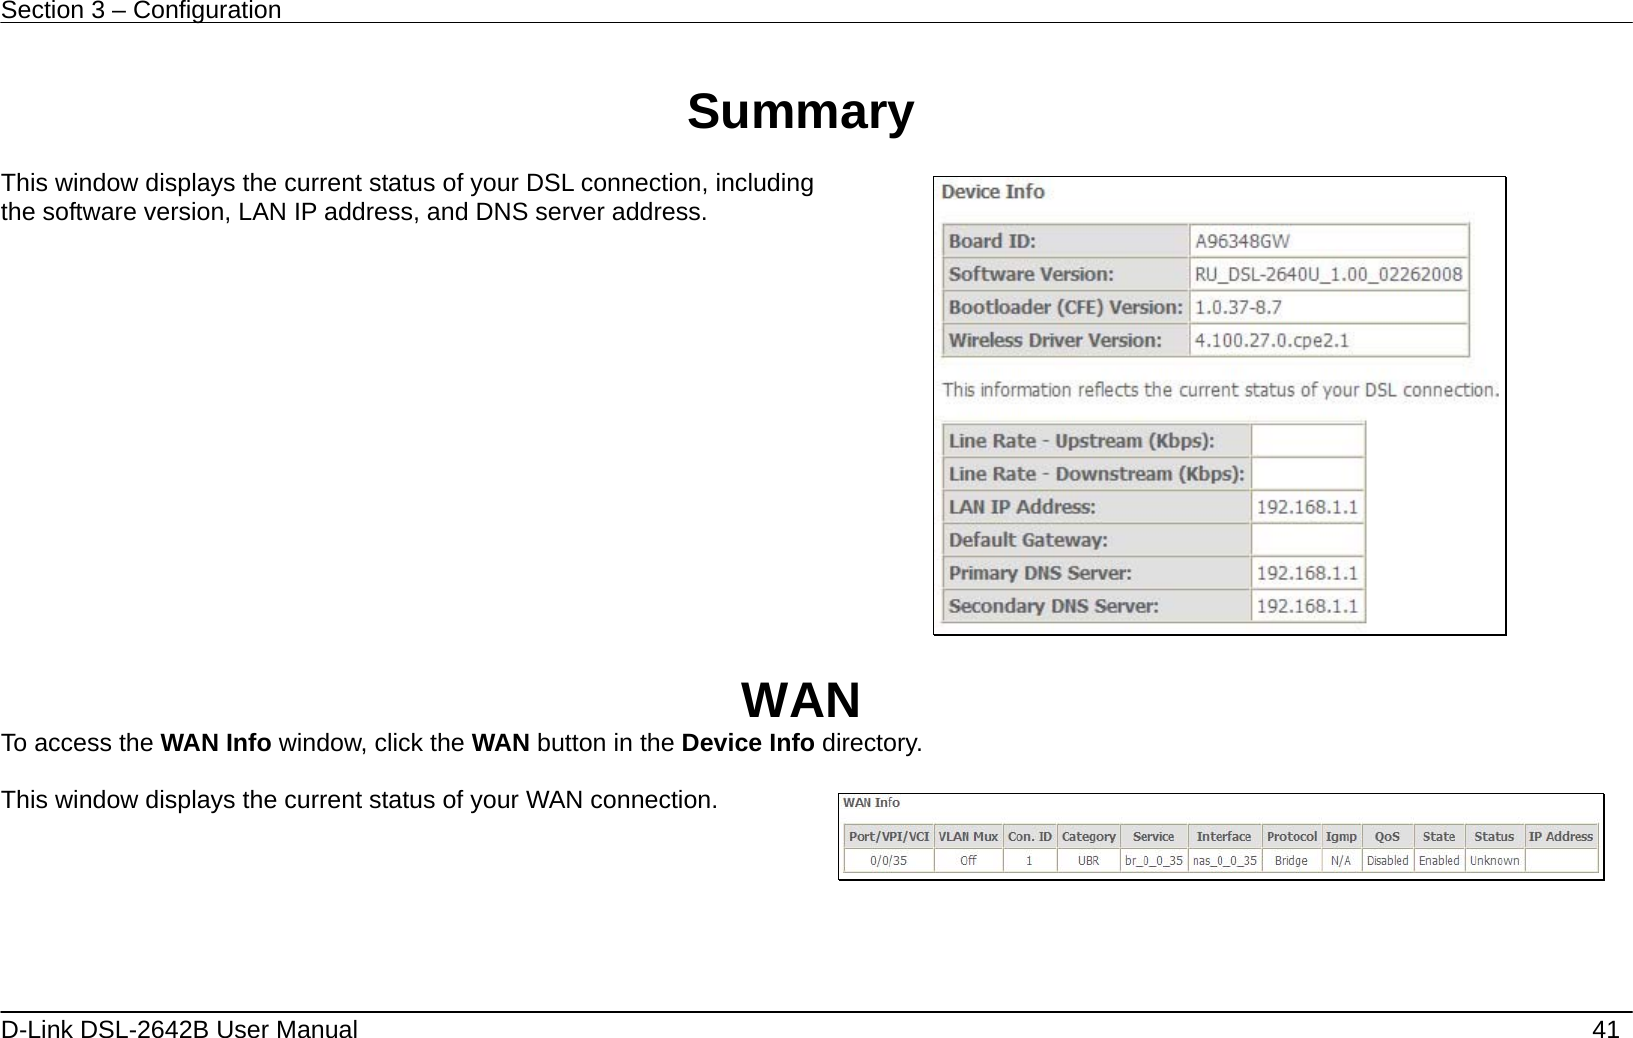 Section 3 – Configuration   D-Link DSL-2642B User Manual    41  Summary  This window displays the current status of your DSL connection, including the software version, LAN IP address, and DNS server address.   WAN To access the WAN Info window, click the WAN button in the Device Info directory.  This window displays the current status of your WAN connection.  